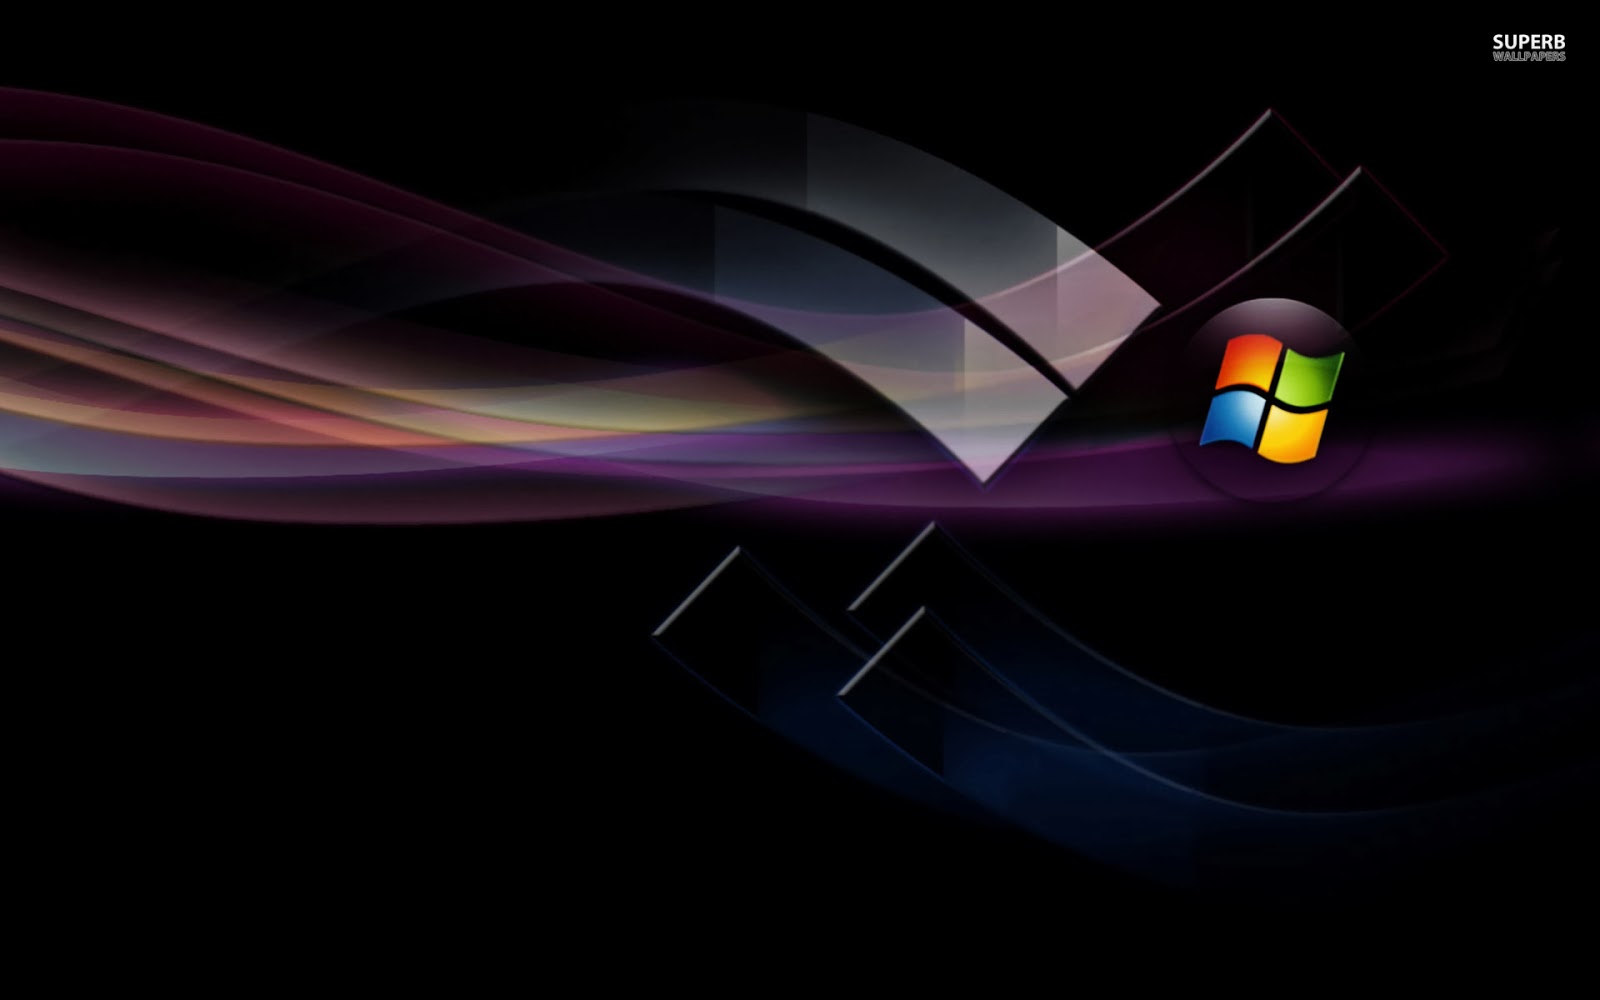 Windows 8 HD Wallpapers - HD Wallpapers Blog Full Hd Wallpapers For Windows 8 1920x1080